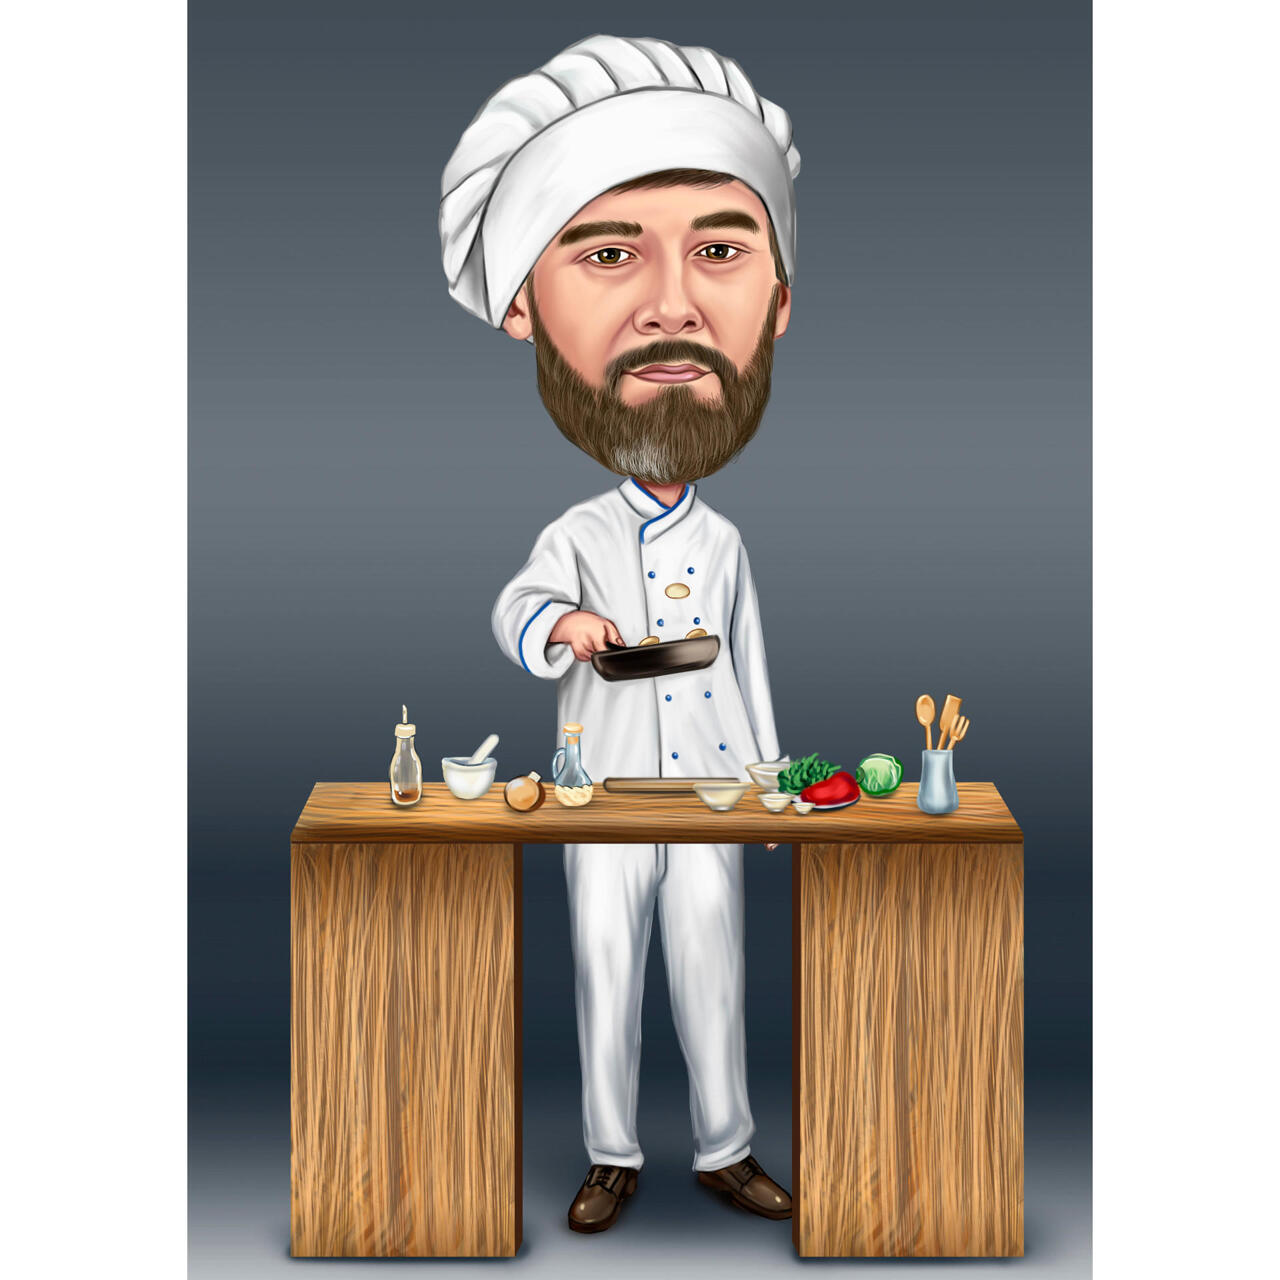 https://img.photolamus.com/oCxE70Lt/1280x1280/c/m/3189542e47cad3426c8b91fee872ce70/custom-cooking-chef-caricature-gift-hand-drawn-in-colored-style-with-gray-background-1280x1280.jpeg